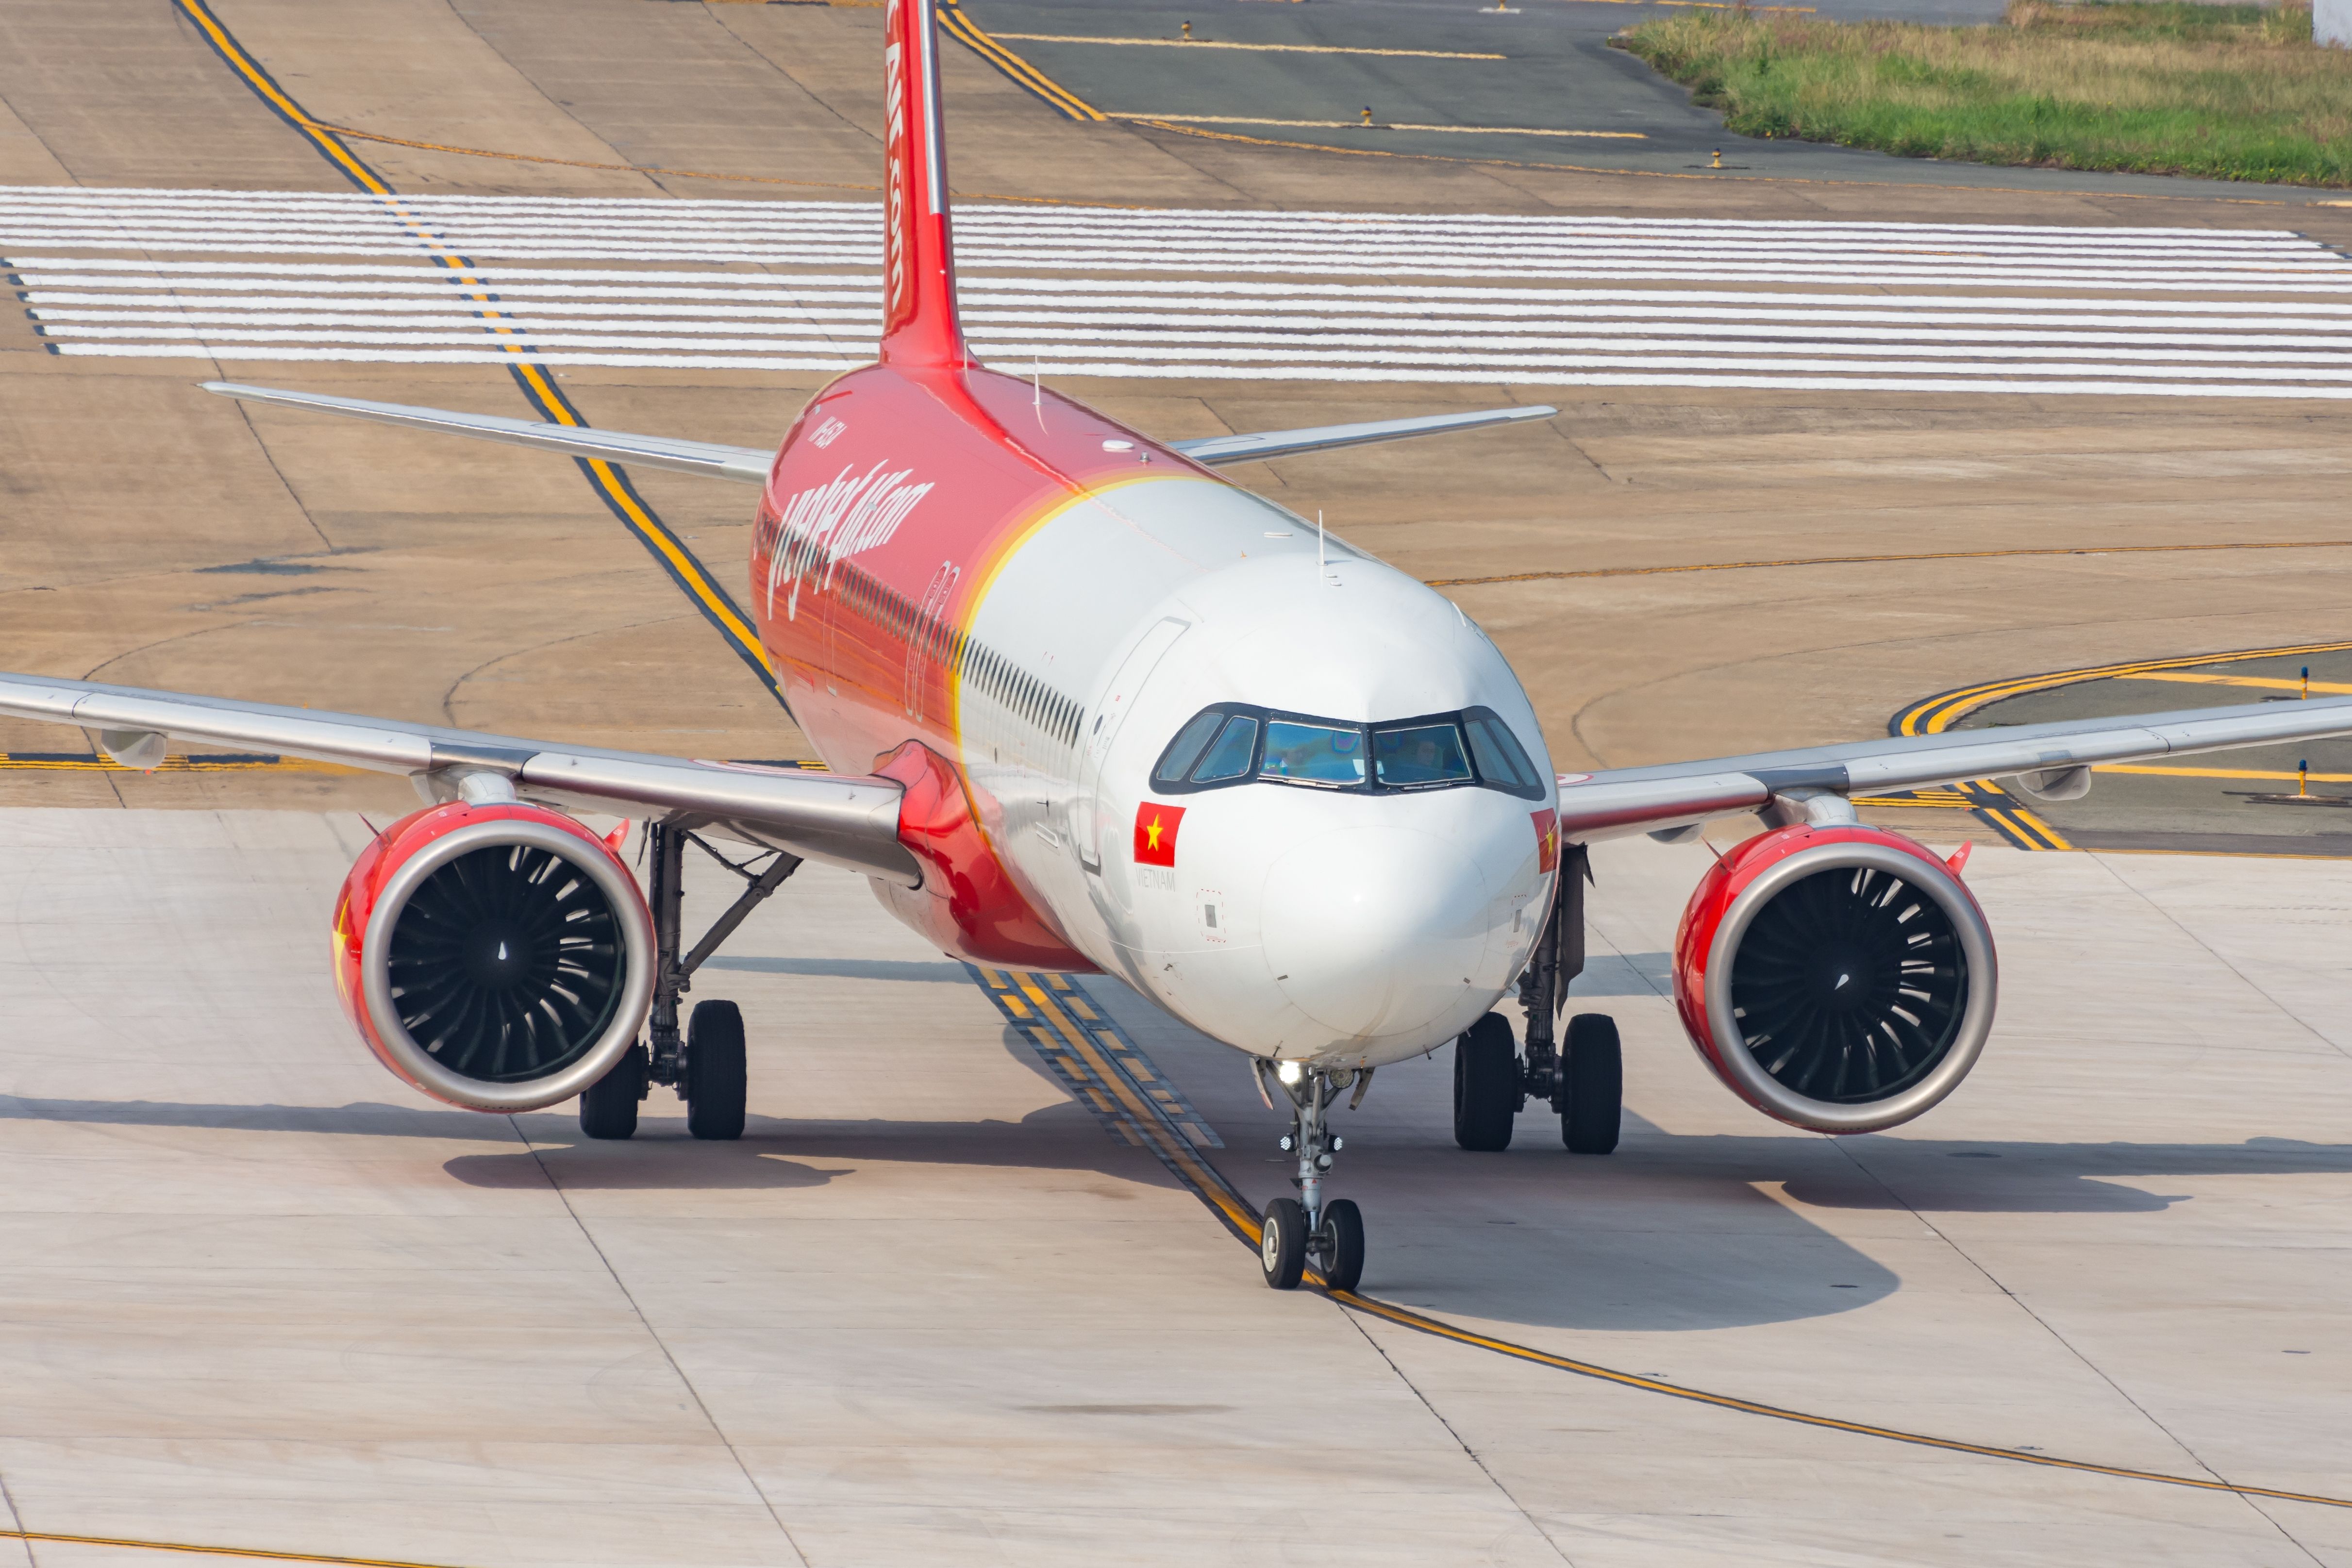 A VietJet Airbus A321neo aircraft on an airport apron.